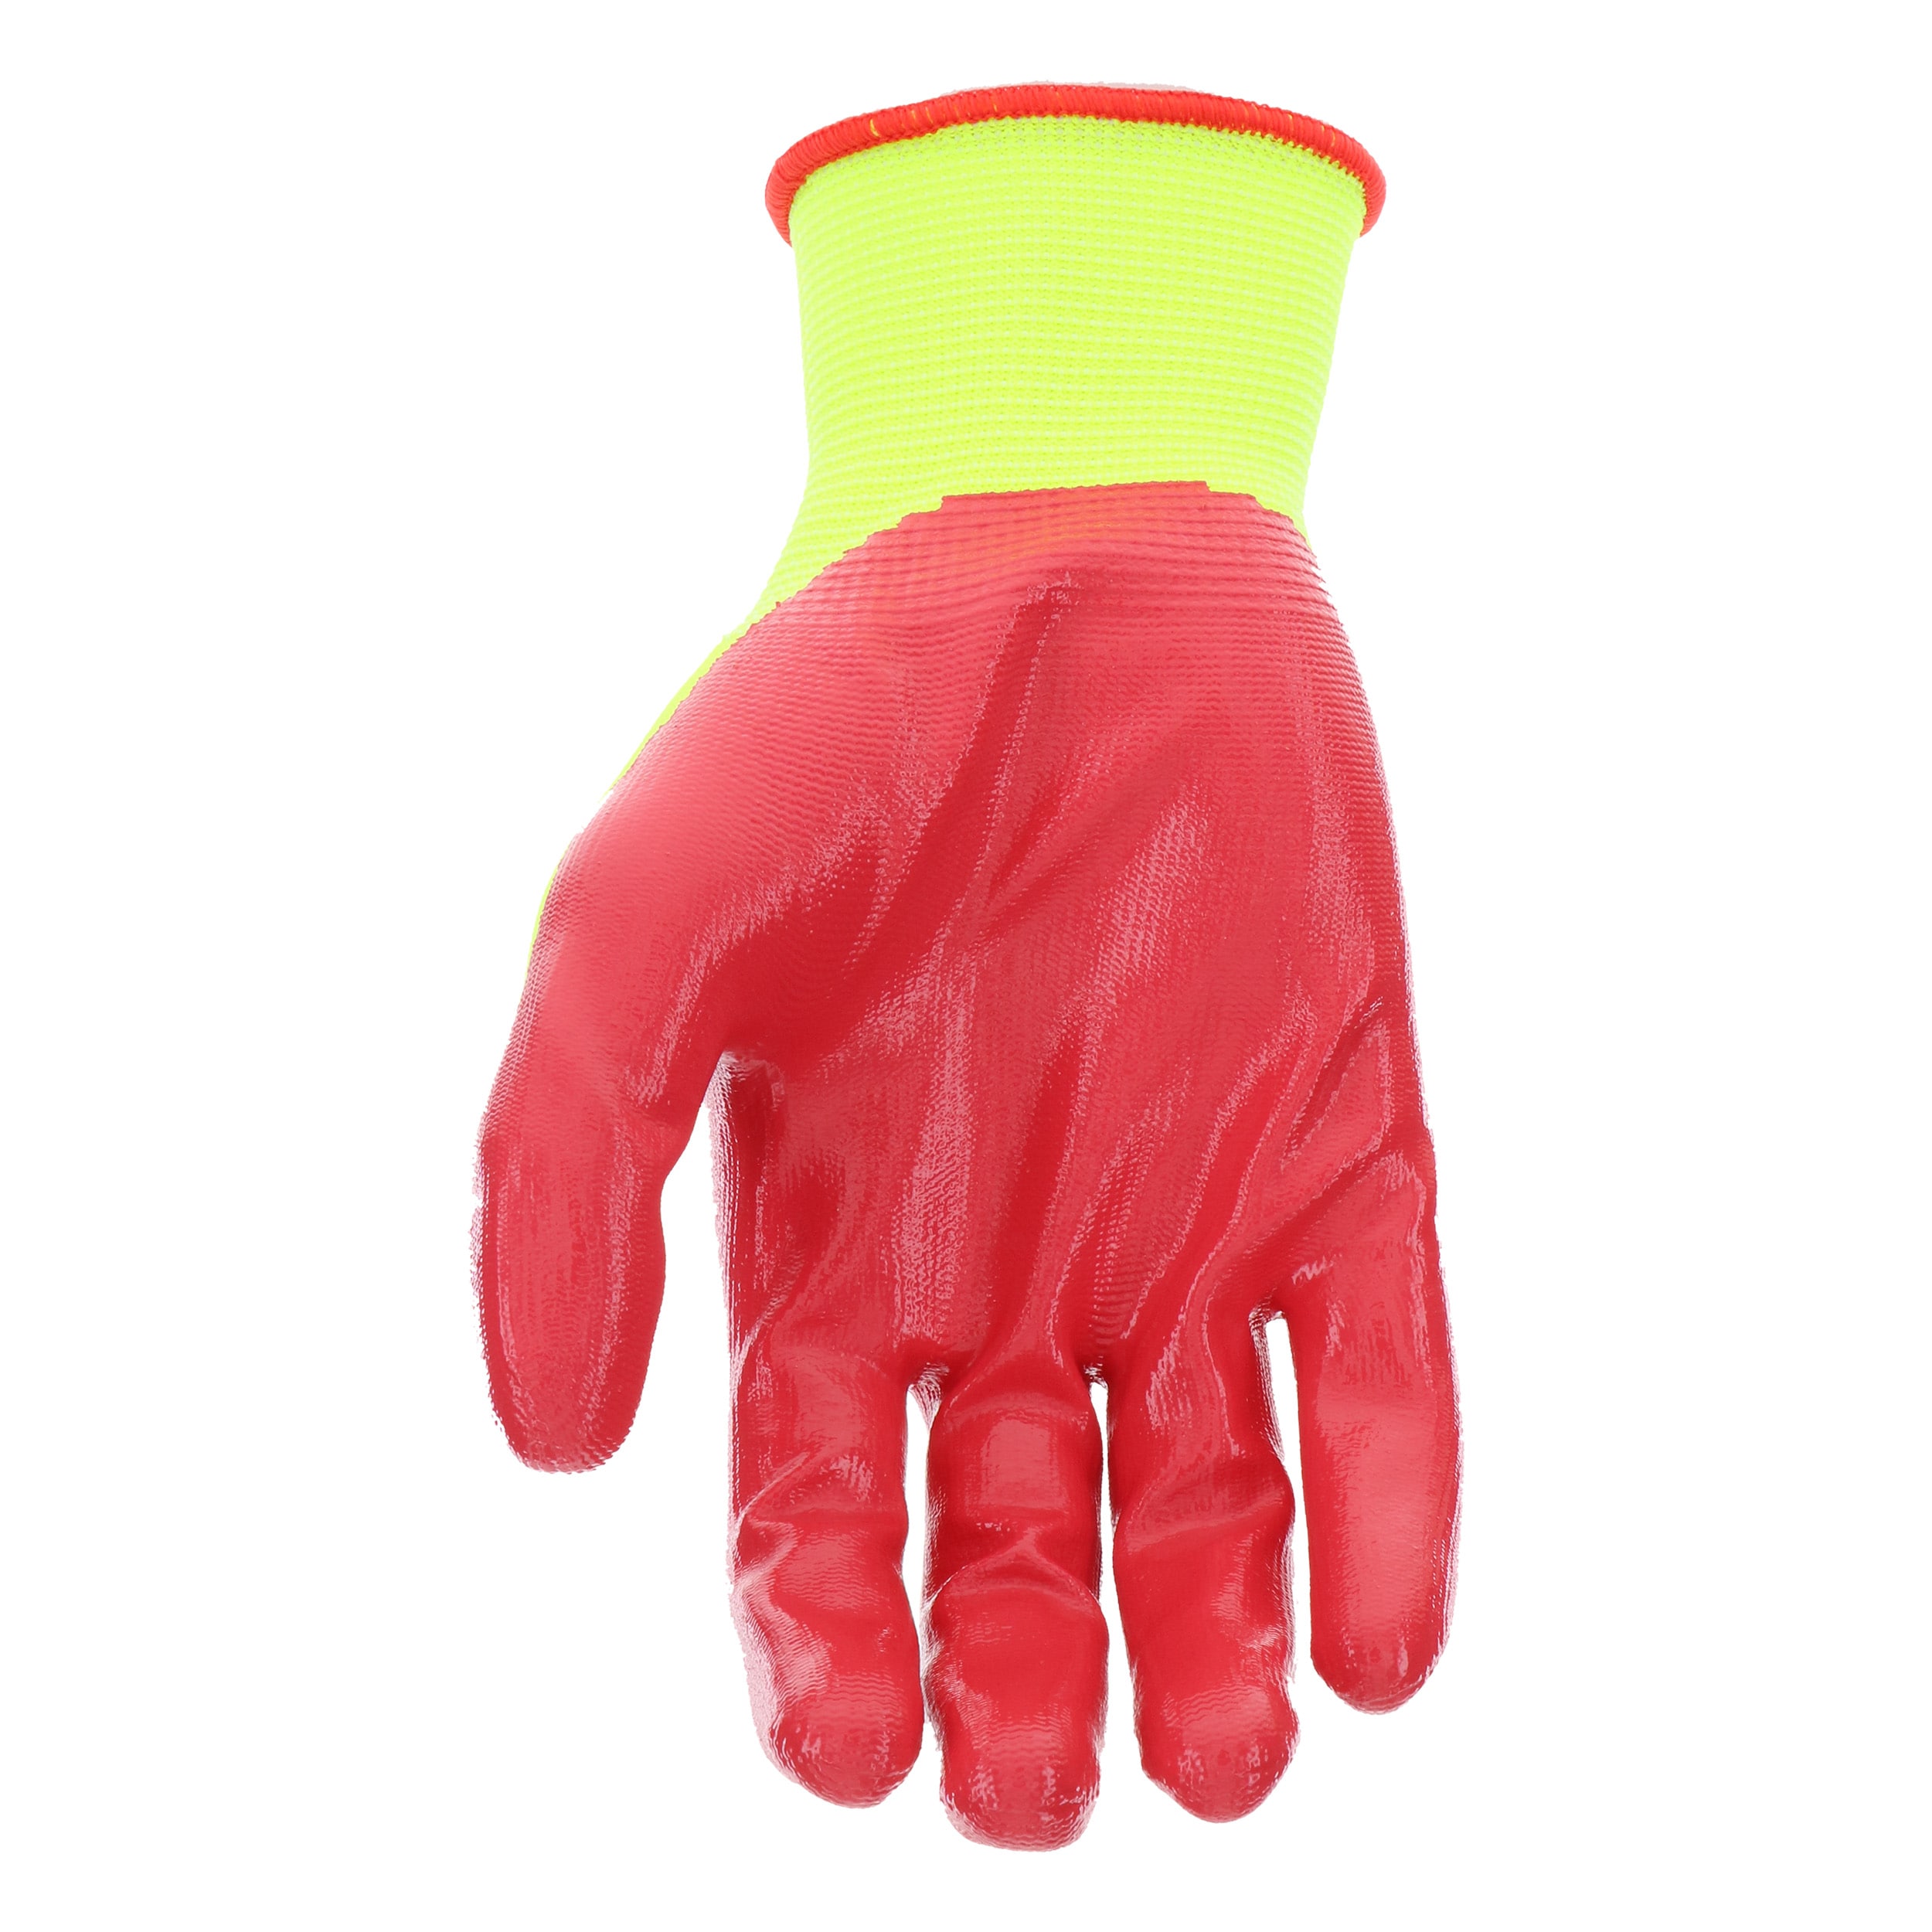 This Dog Grooming Glove Is Just $8 on  Right Now